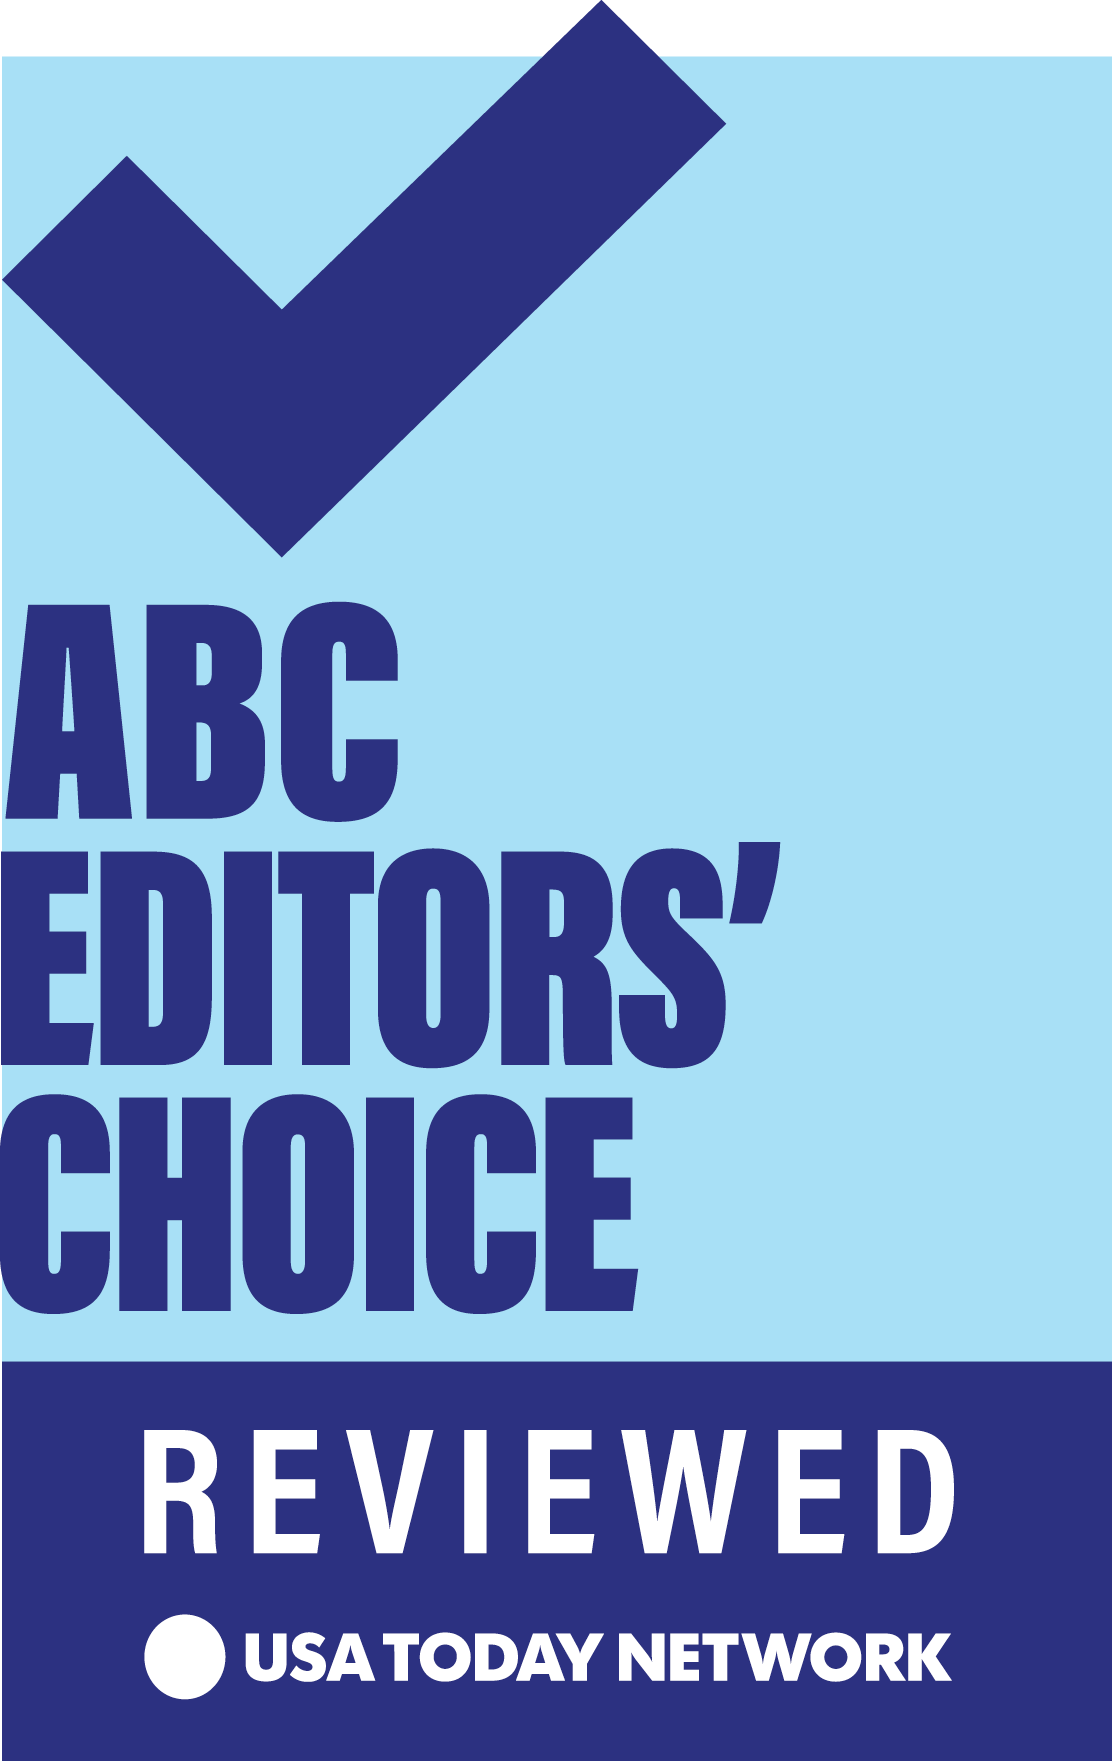 ABC Editor's Choice - Reviewed - USA Today Network